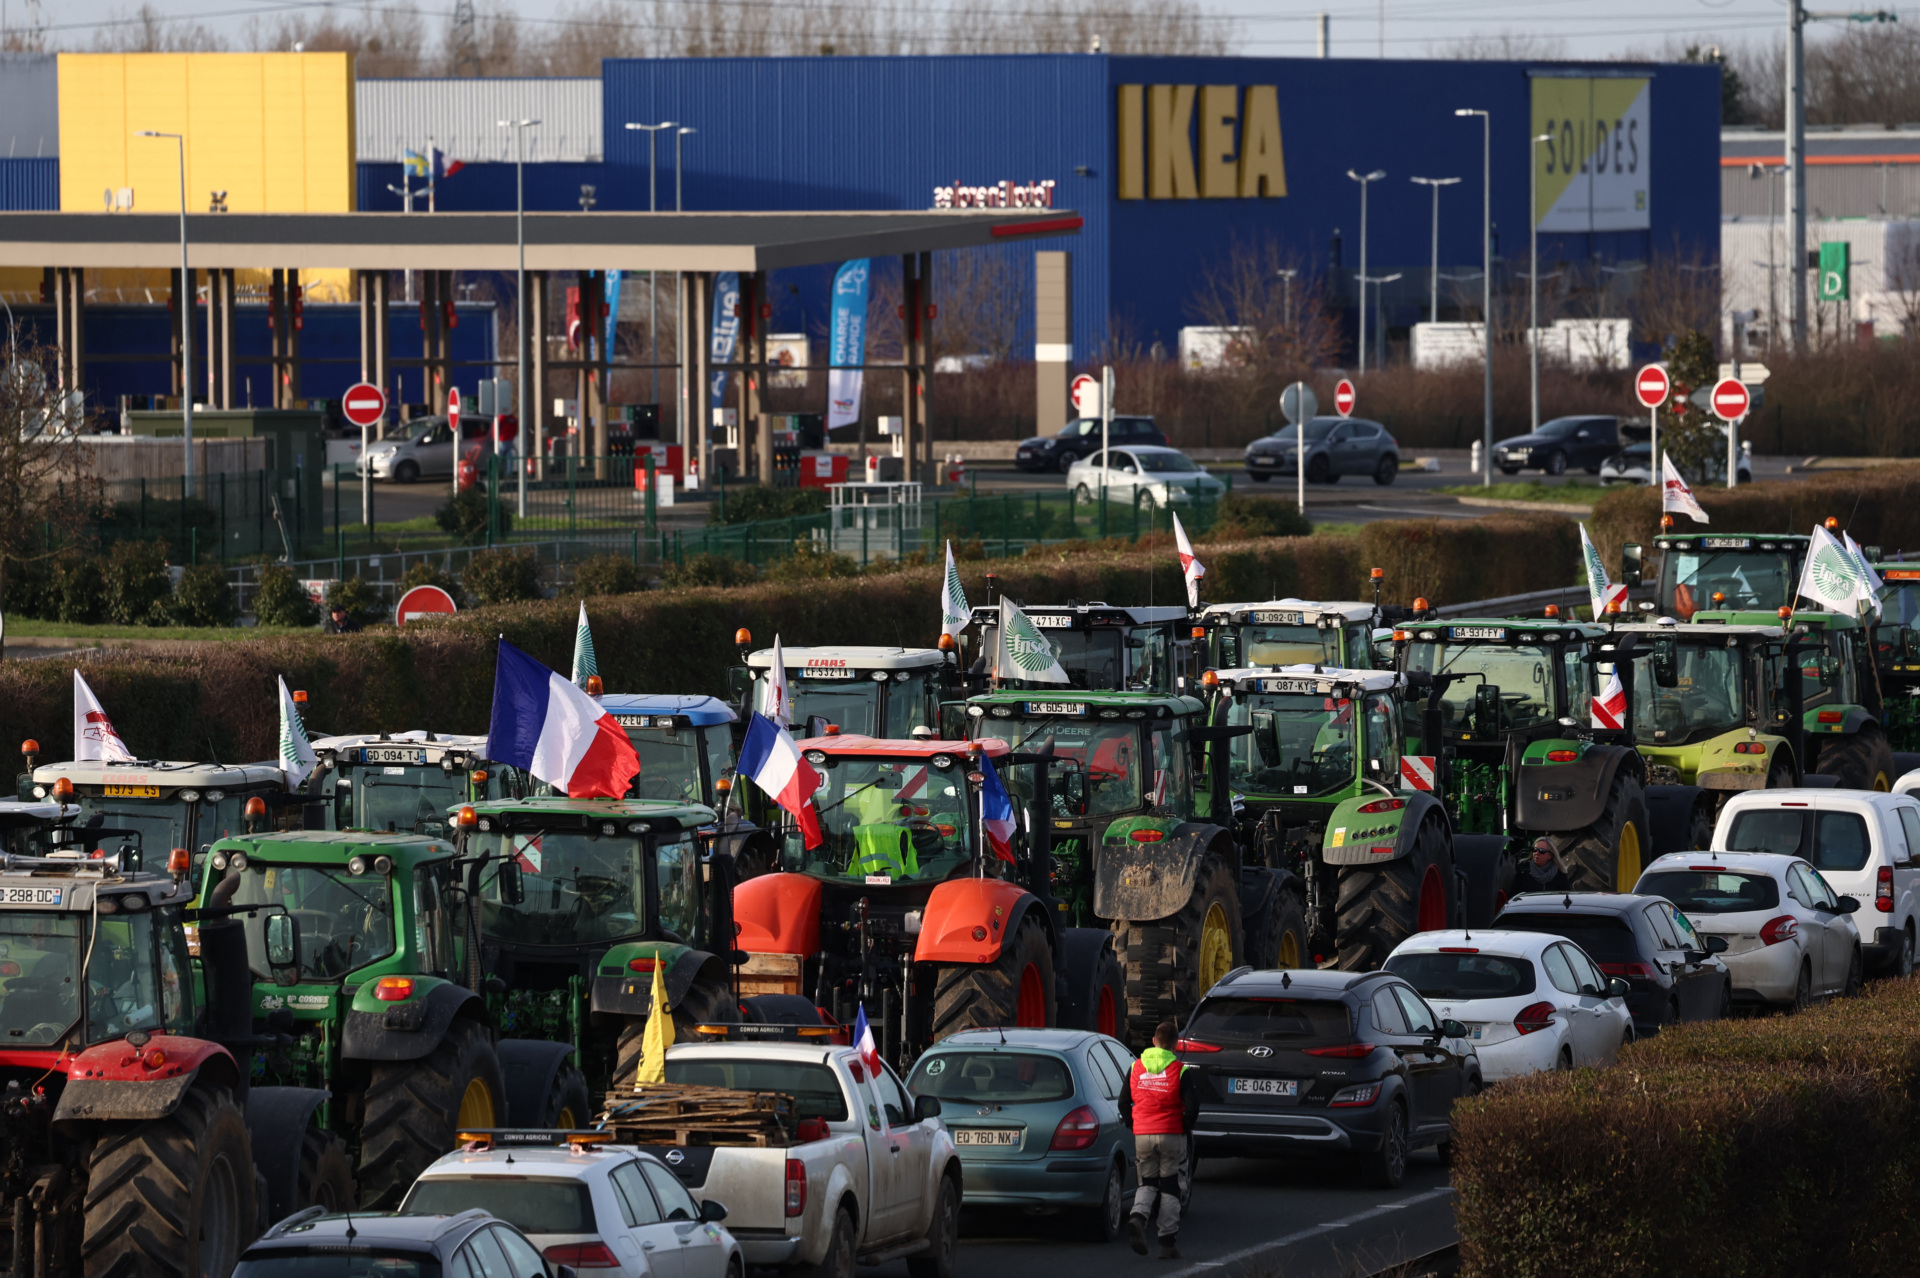 Farmers driving tractors take part in a road blockage of the A6 highway near Villabe, south of Paris, on January 29, 2024, amid nationwide protests called by several farmers unions on pay, tax and regulations. Local branches of major farmer unions FNSEA and Jeunes Agriculteurs announced on January 27, 2024, a "siege of the capital for an indefinite period" starting at 2 p.m. on January 29, 2024, as some farmers deem the government's announcements in favor of the sector are insufficient. (Photo by EMMANUEL DUNAND / AFP) (Photo by EMMANUEL DUNAND/AFP via Getty Images)